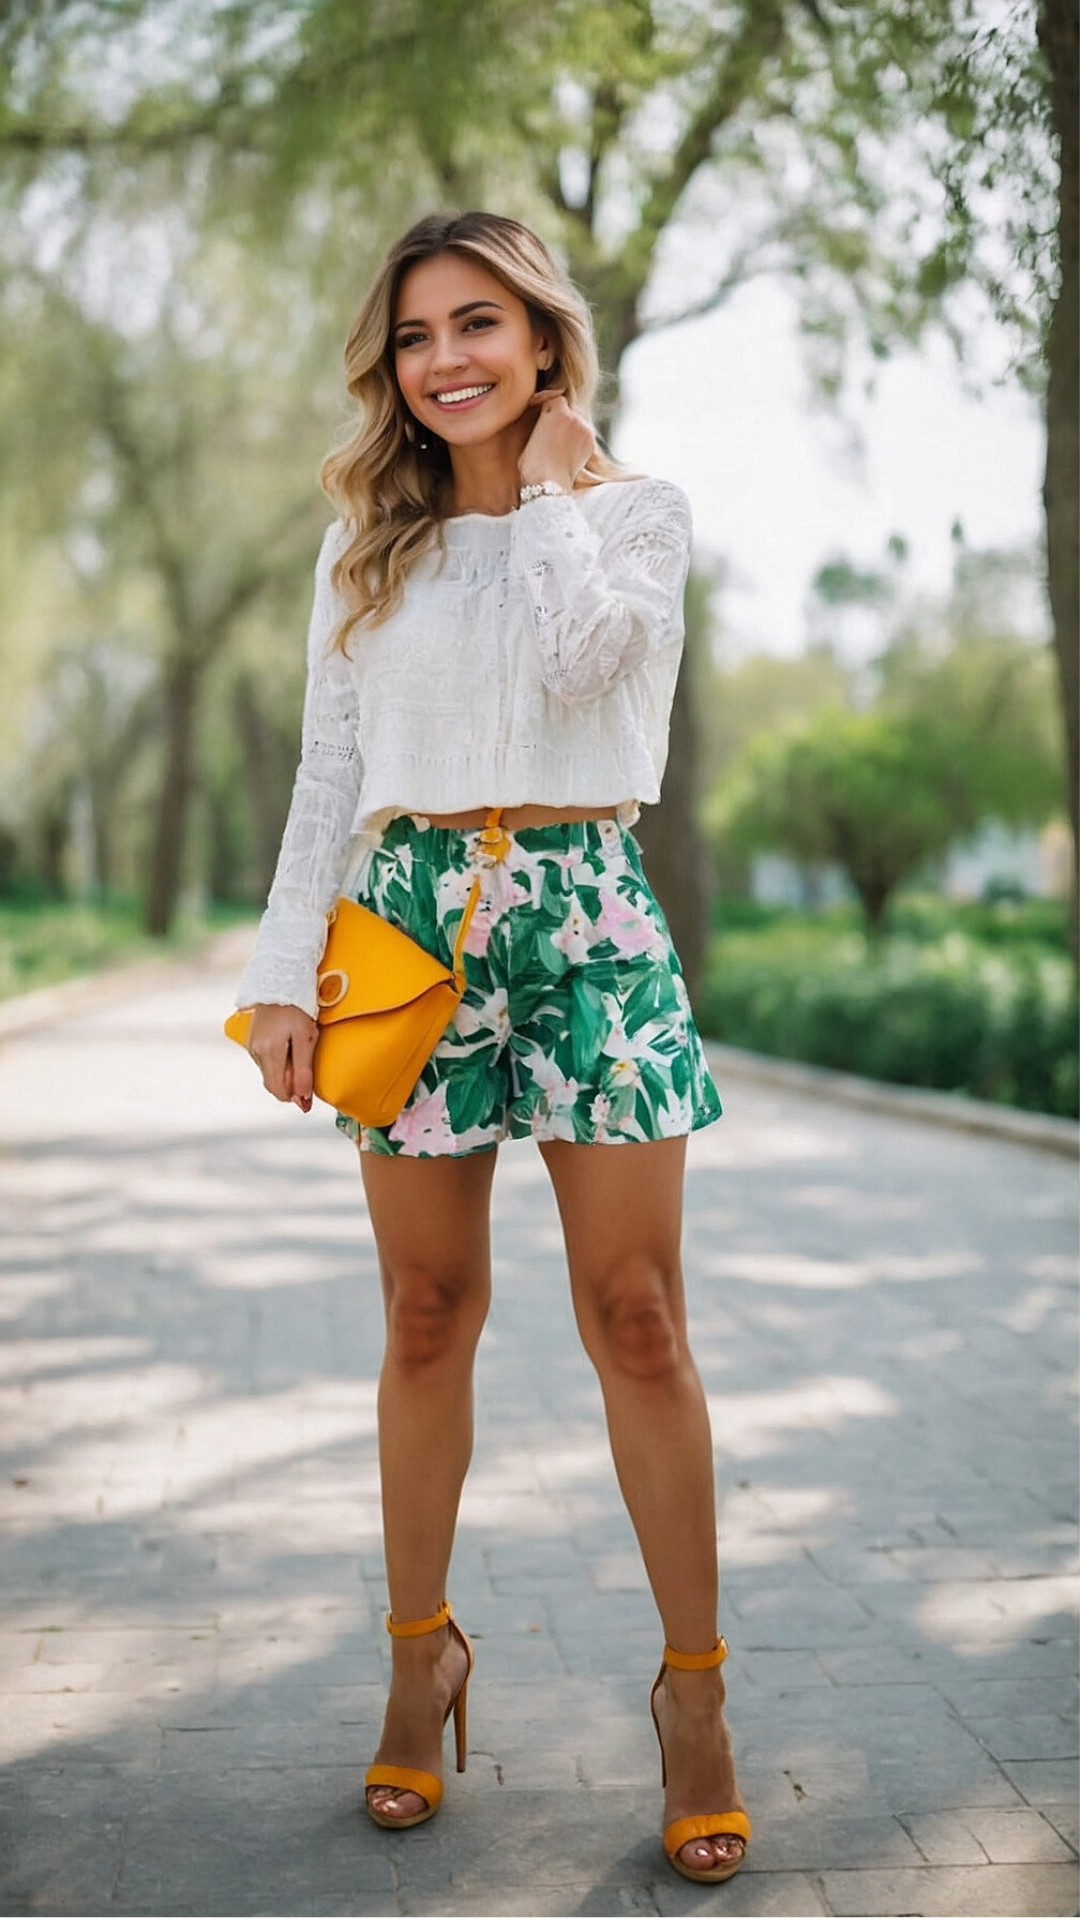 A Celebration of Spring: Adorable Outfits in Fresh Colors